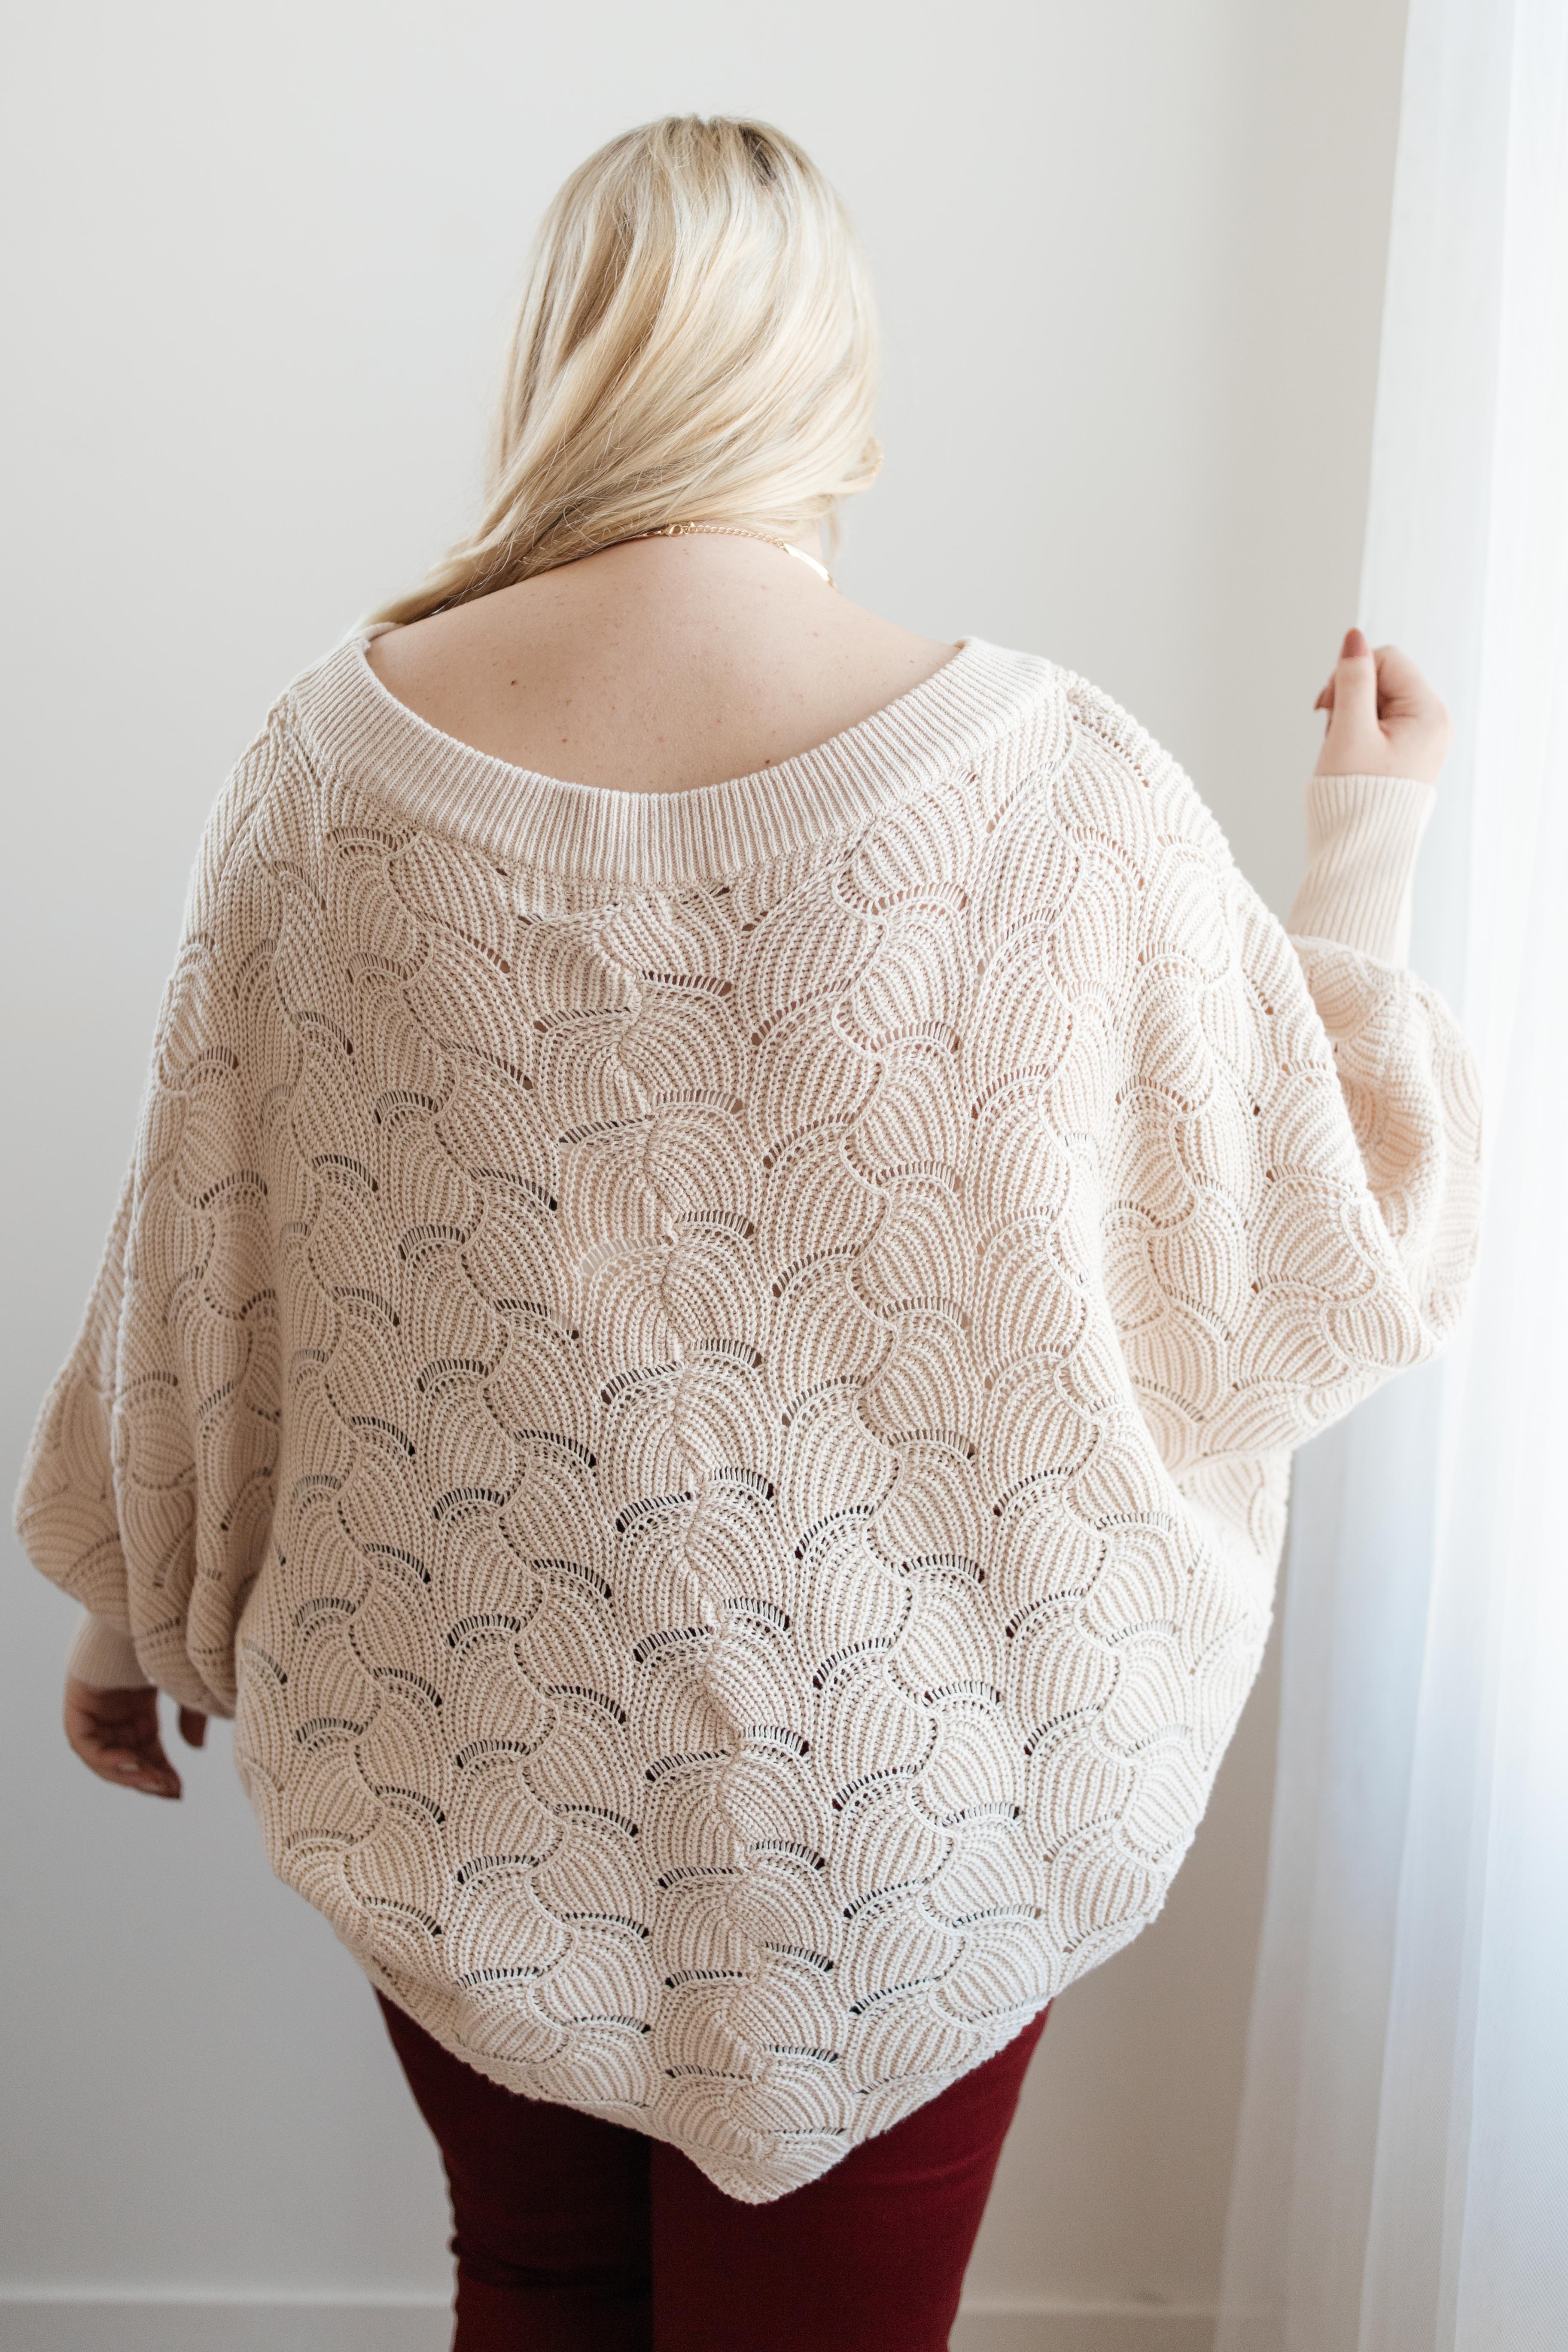 Designed For Details Top in Taupe